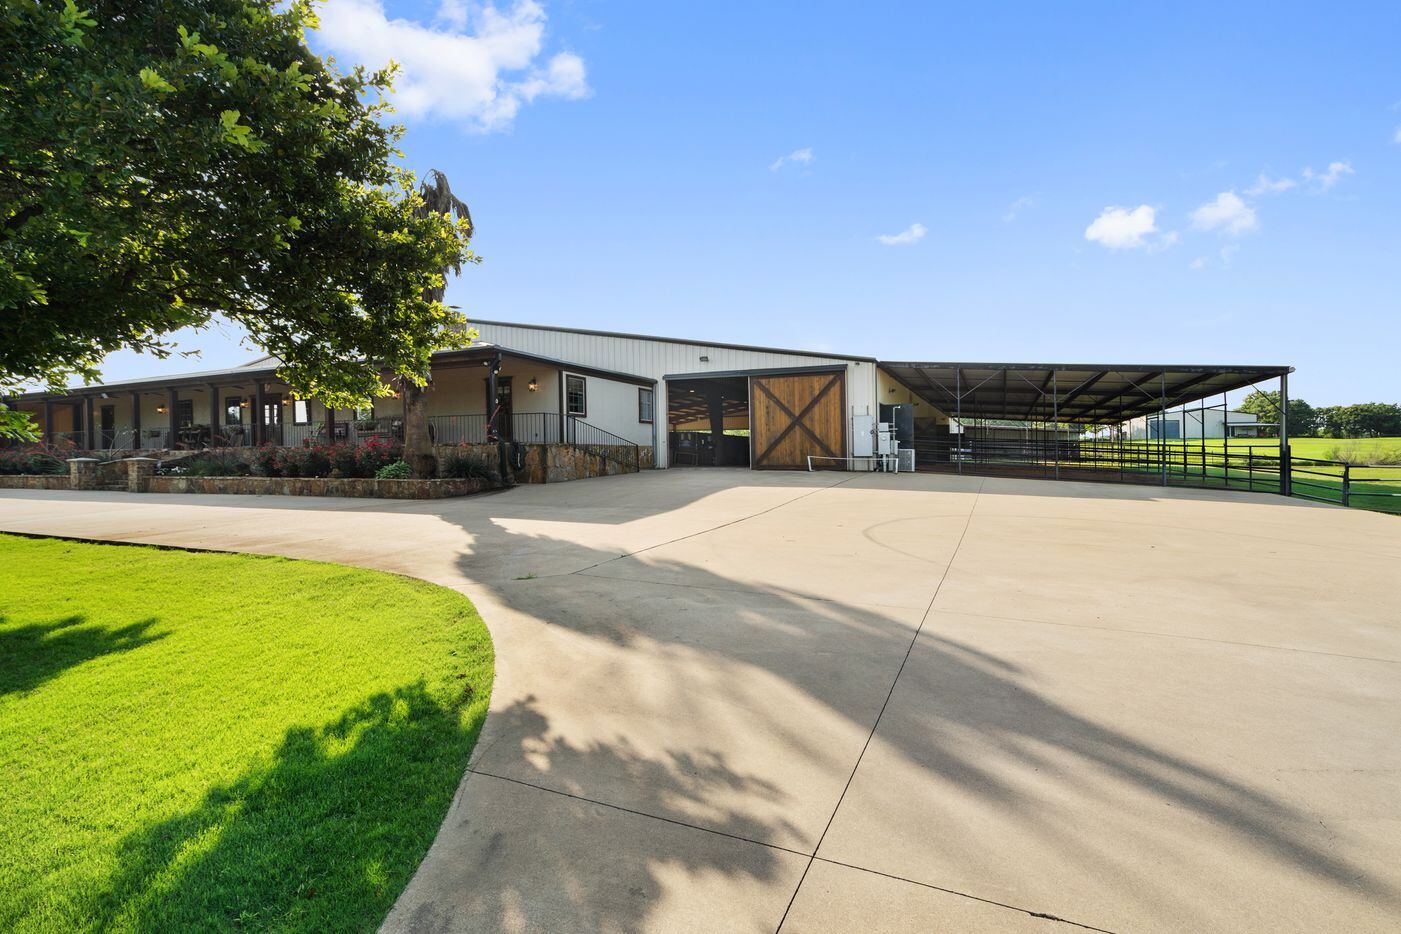 Check out the C7 Ranch at 3161 County Road 808 in Cleburne.